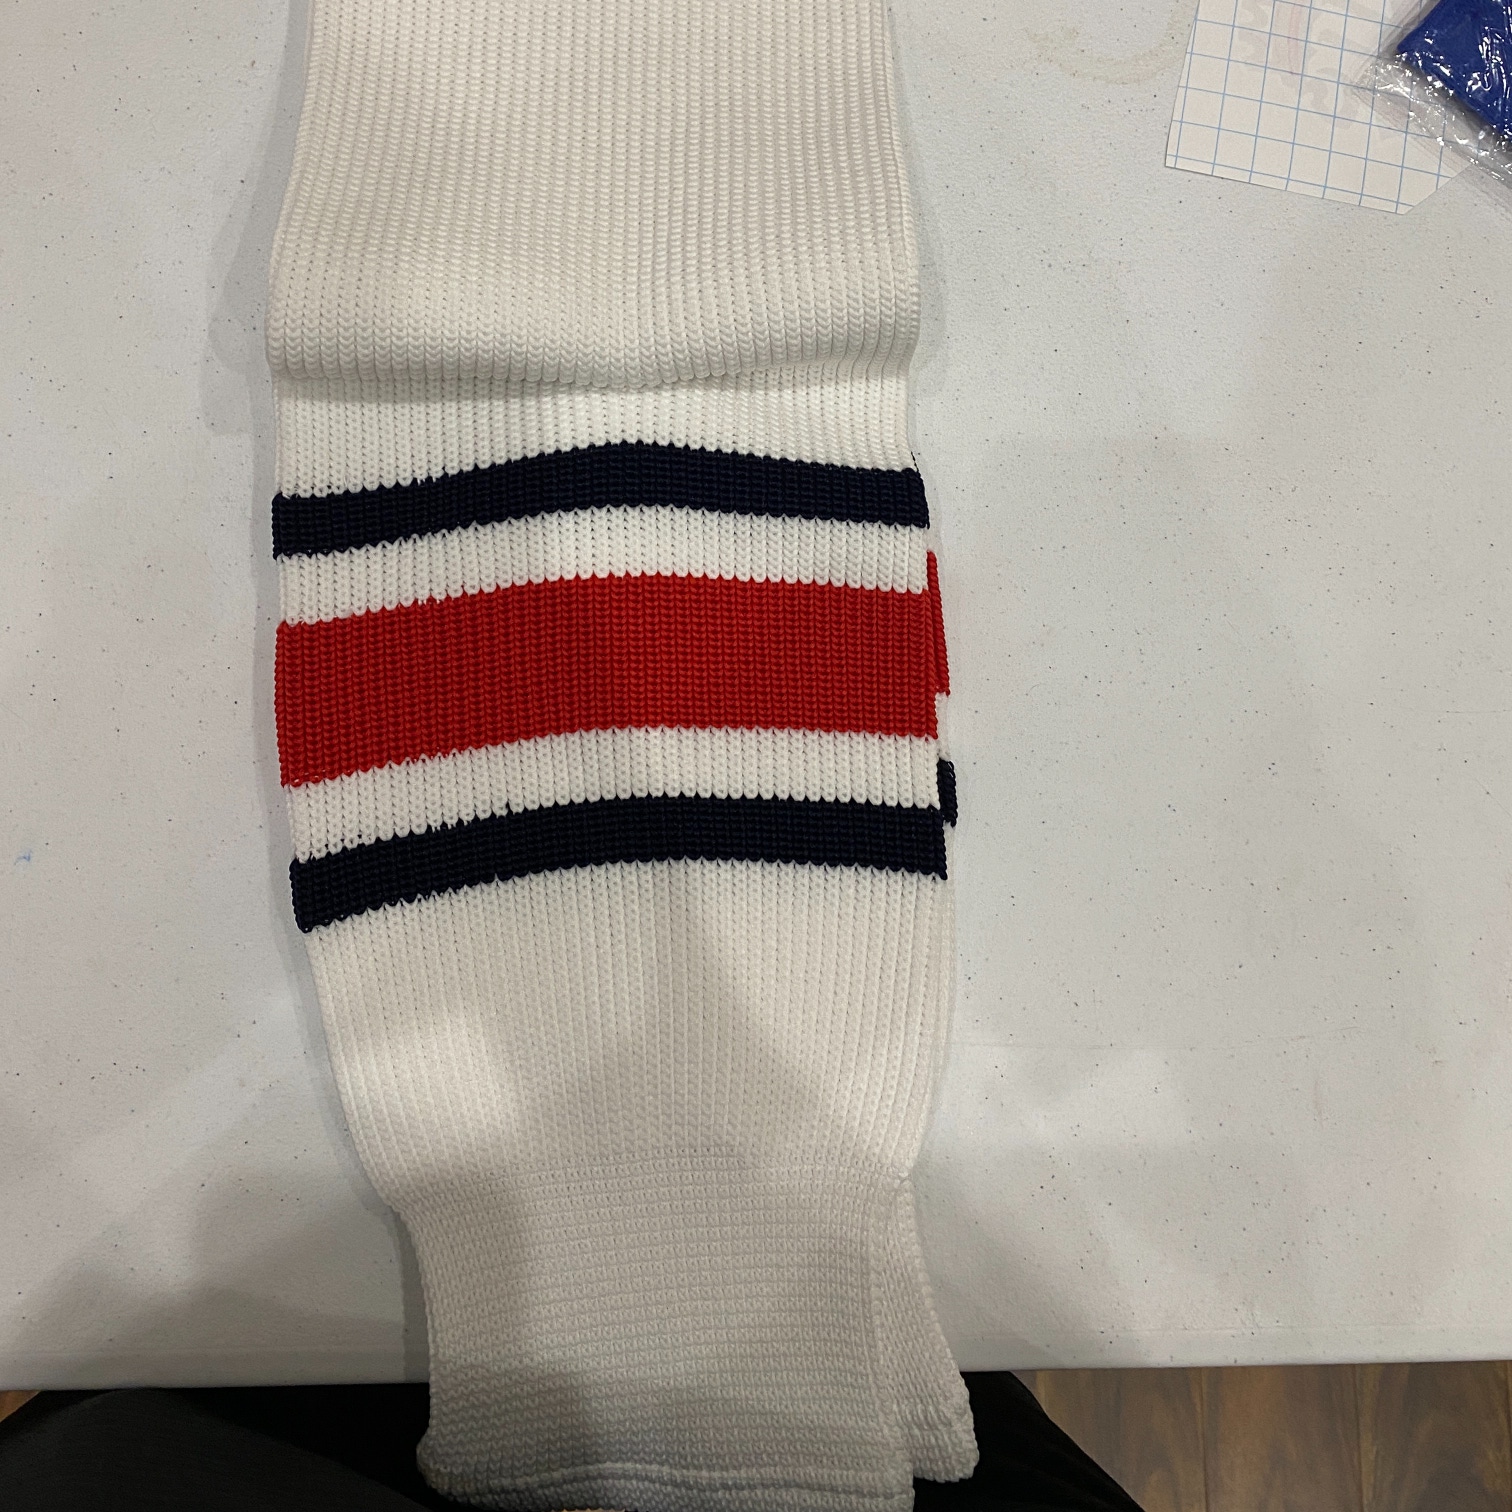 TRONX SK200 24" White/Navy/Red Knit Socks  50 Polyester / 50 Cotton Elasticized Ankle $9.99